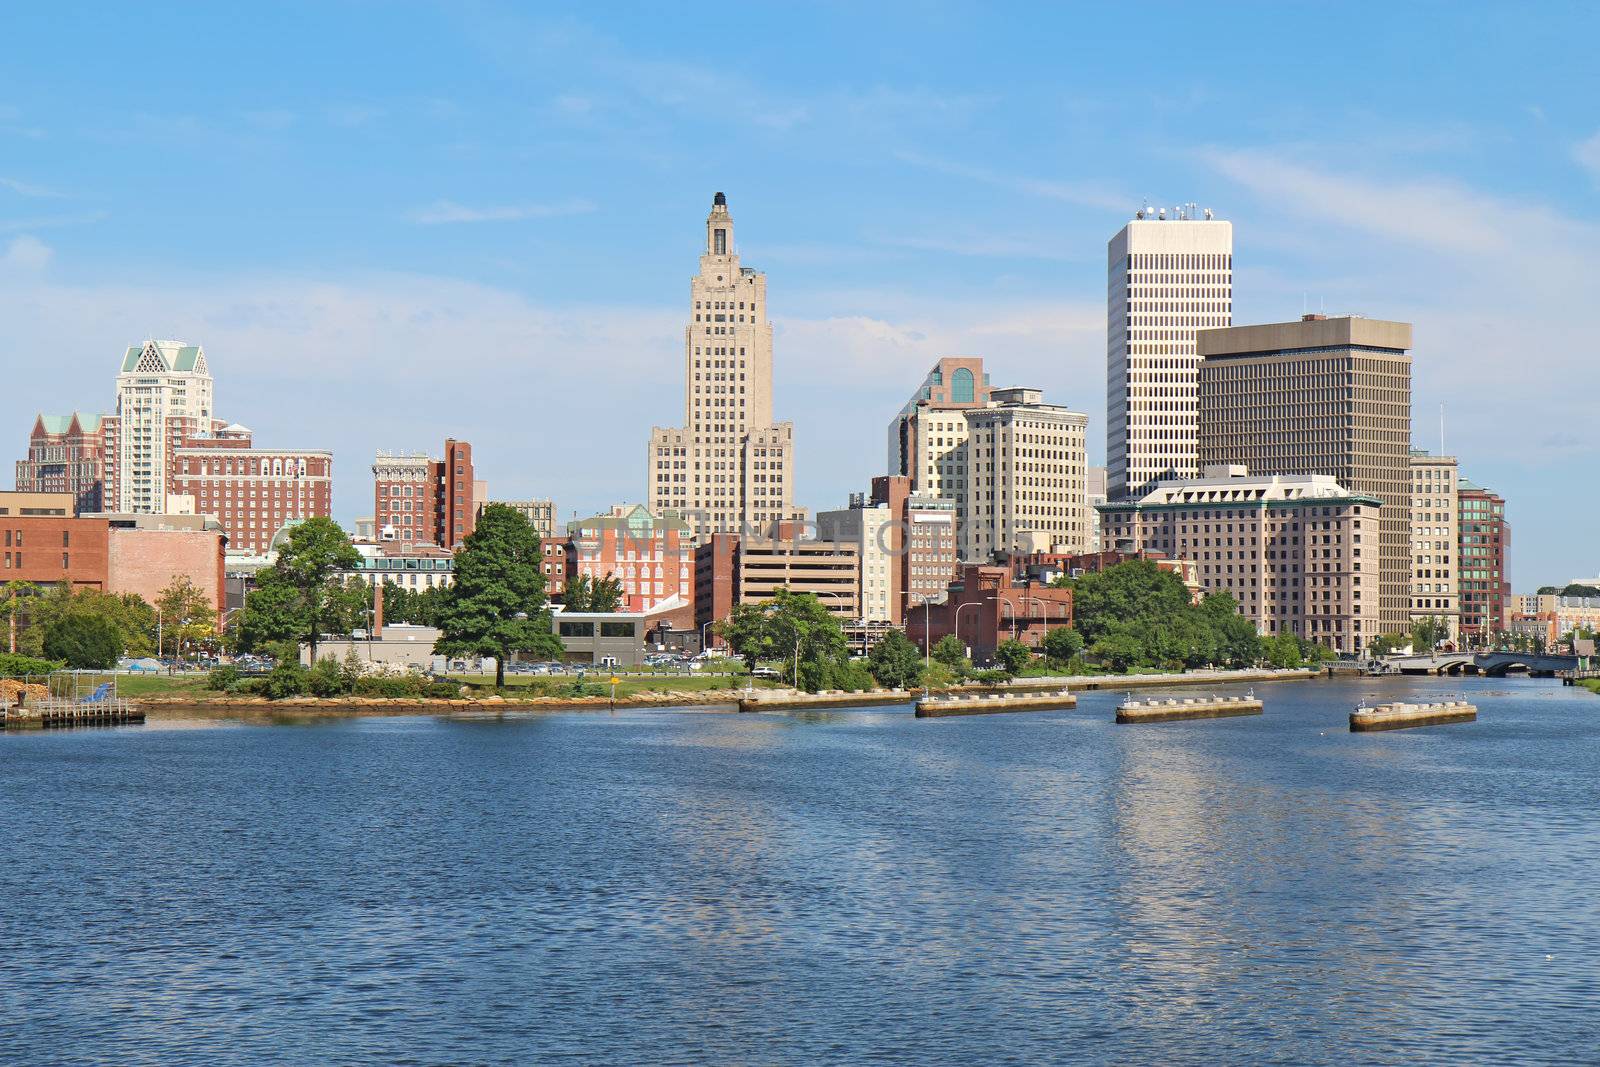 View of the skyline of Providence, Rhode Island, from the far side of the Providence River against a blue sky and white clouds